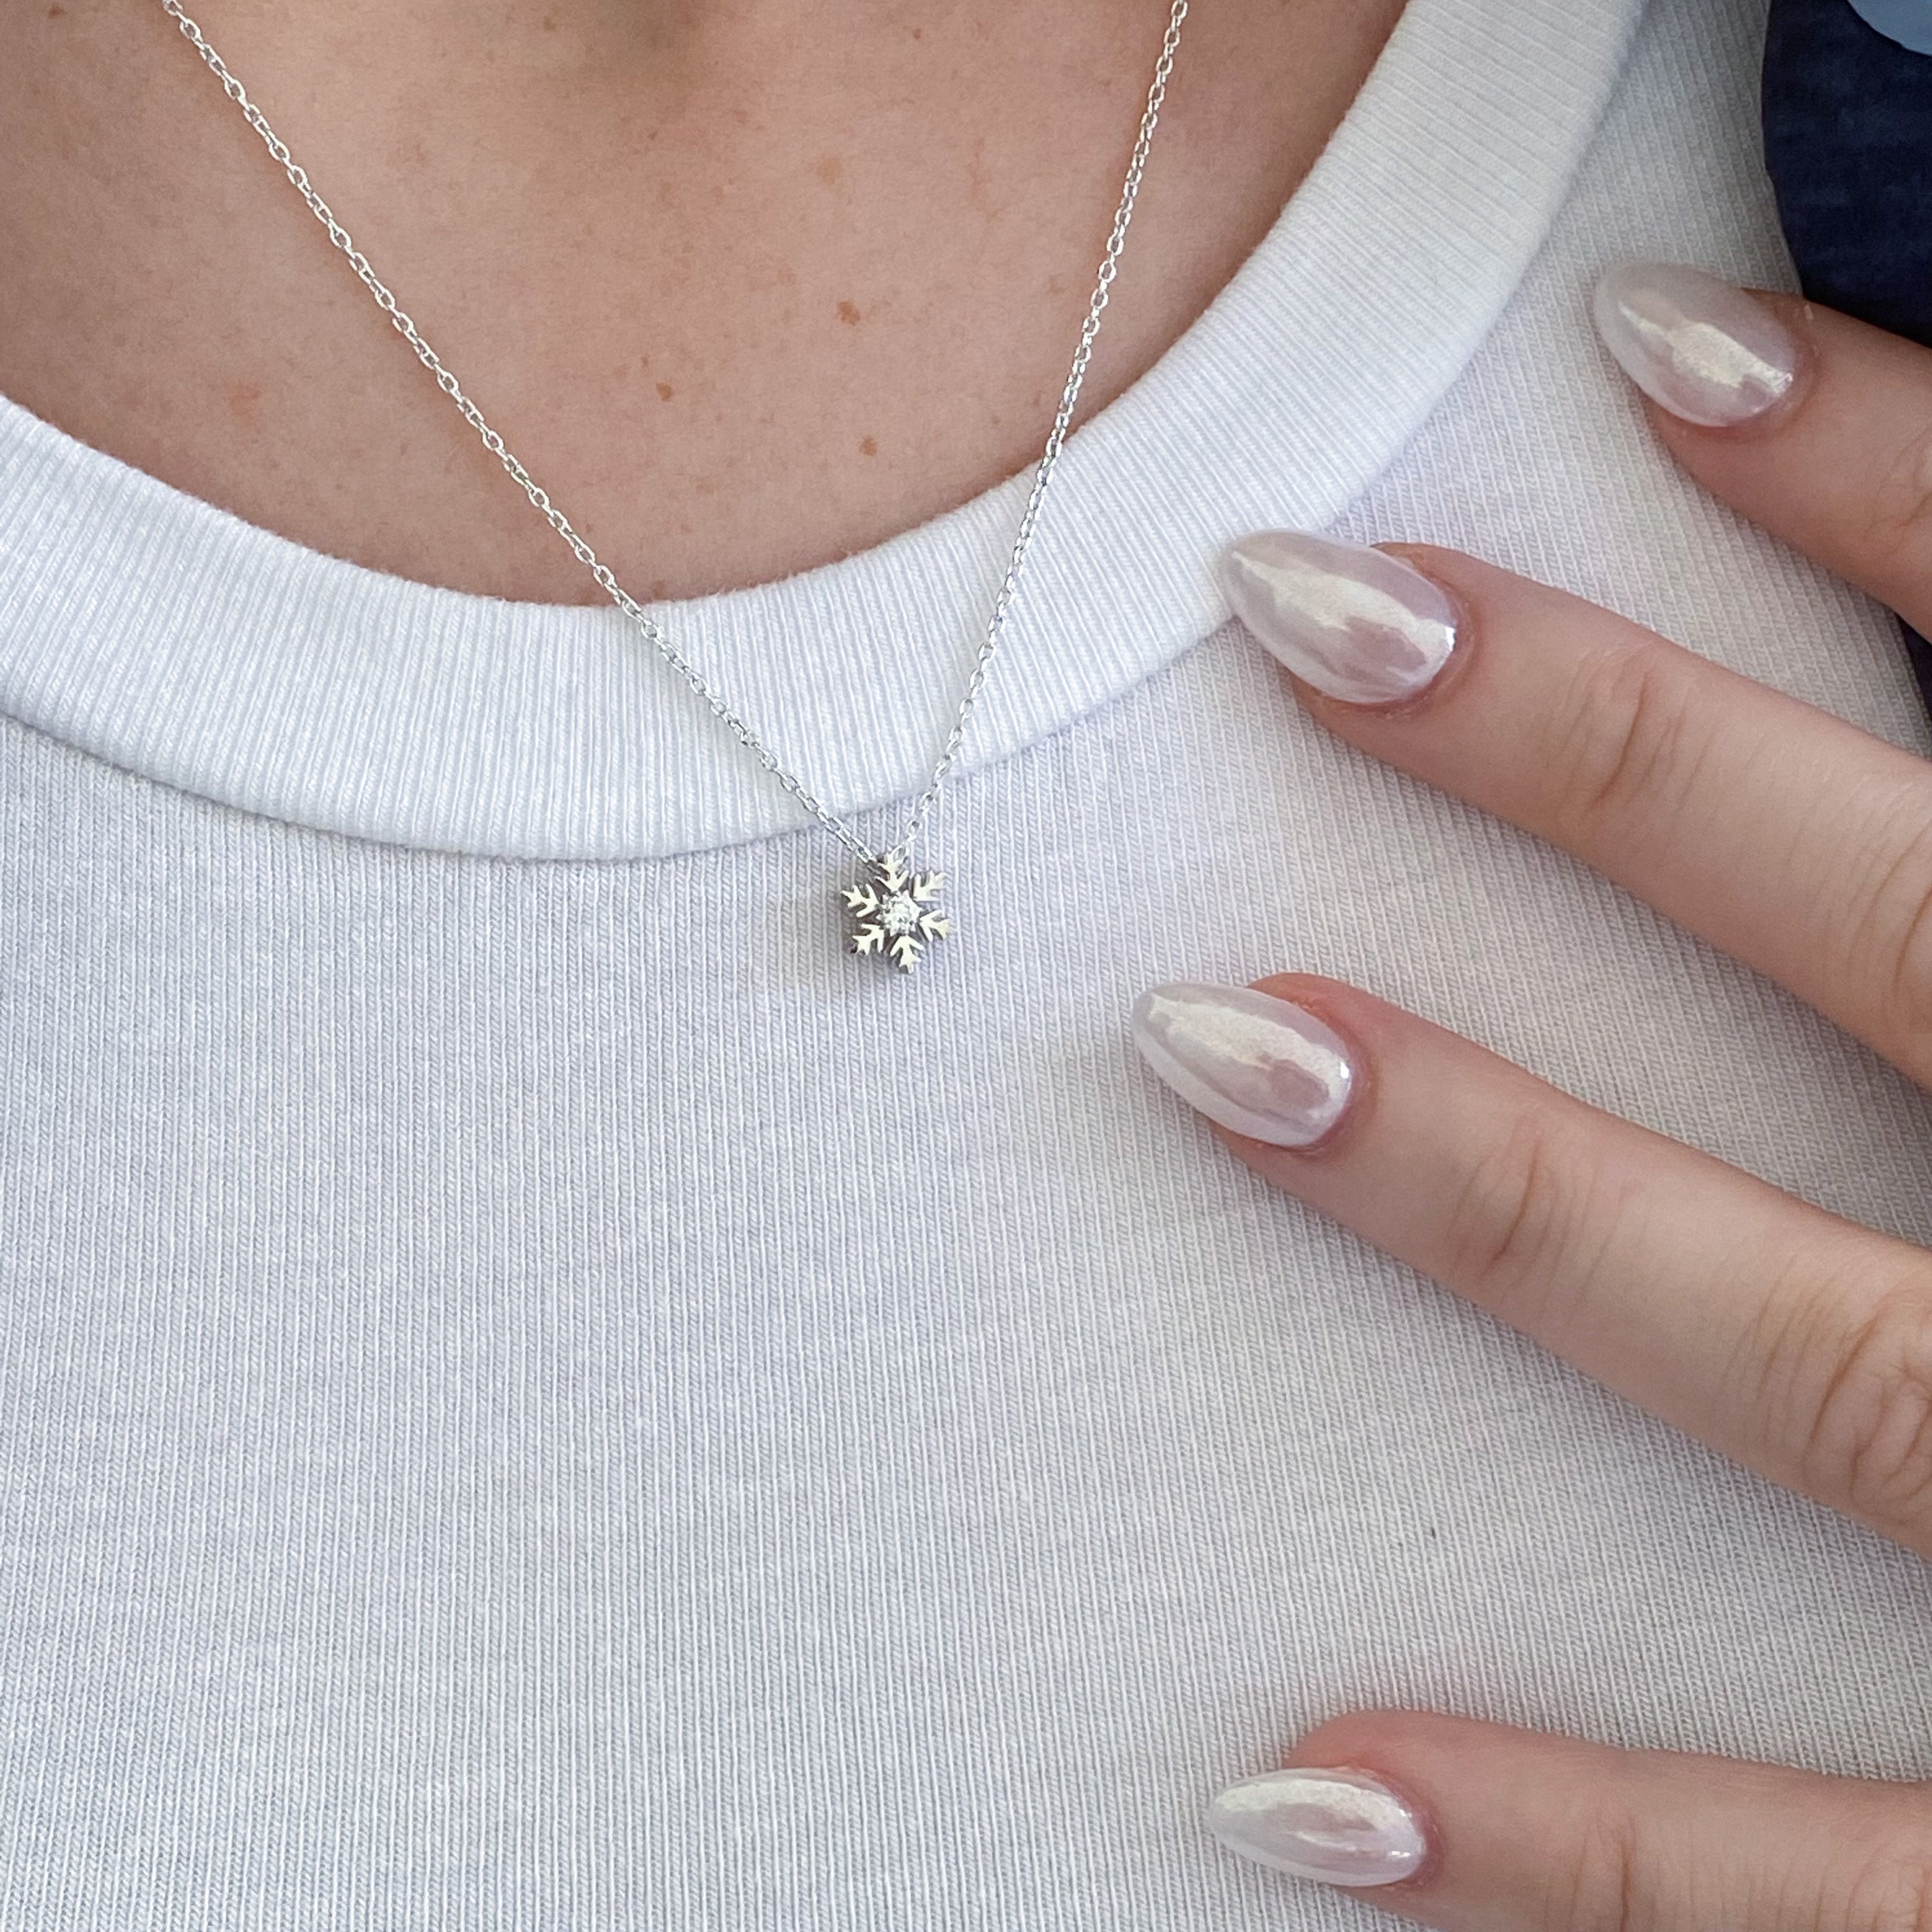 Small Diamond Snowflake Necklace in 9ct White Gold